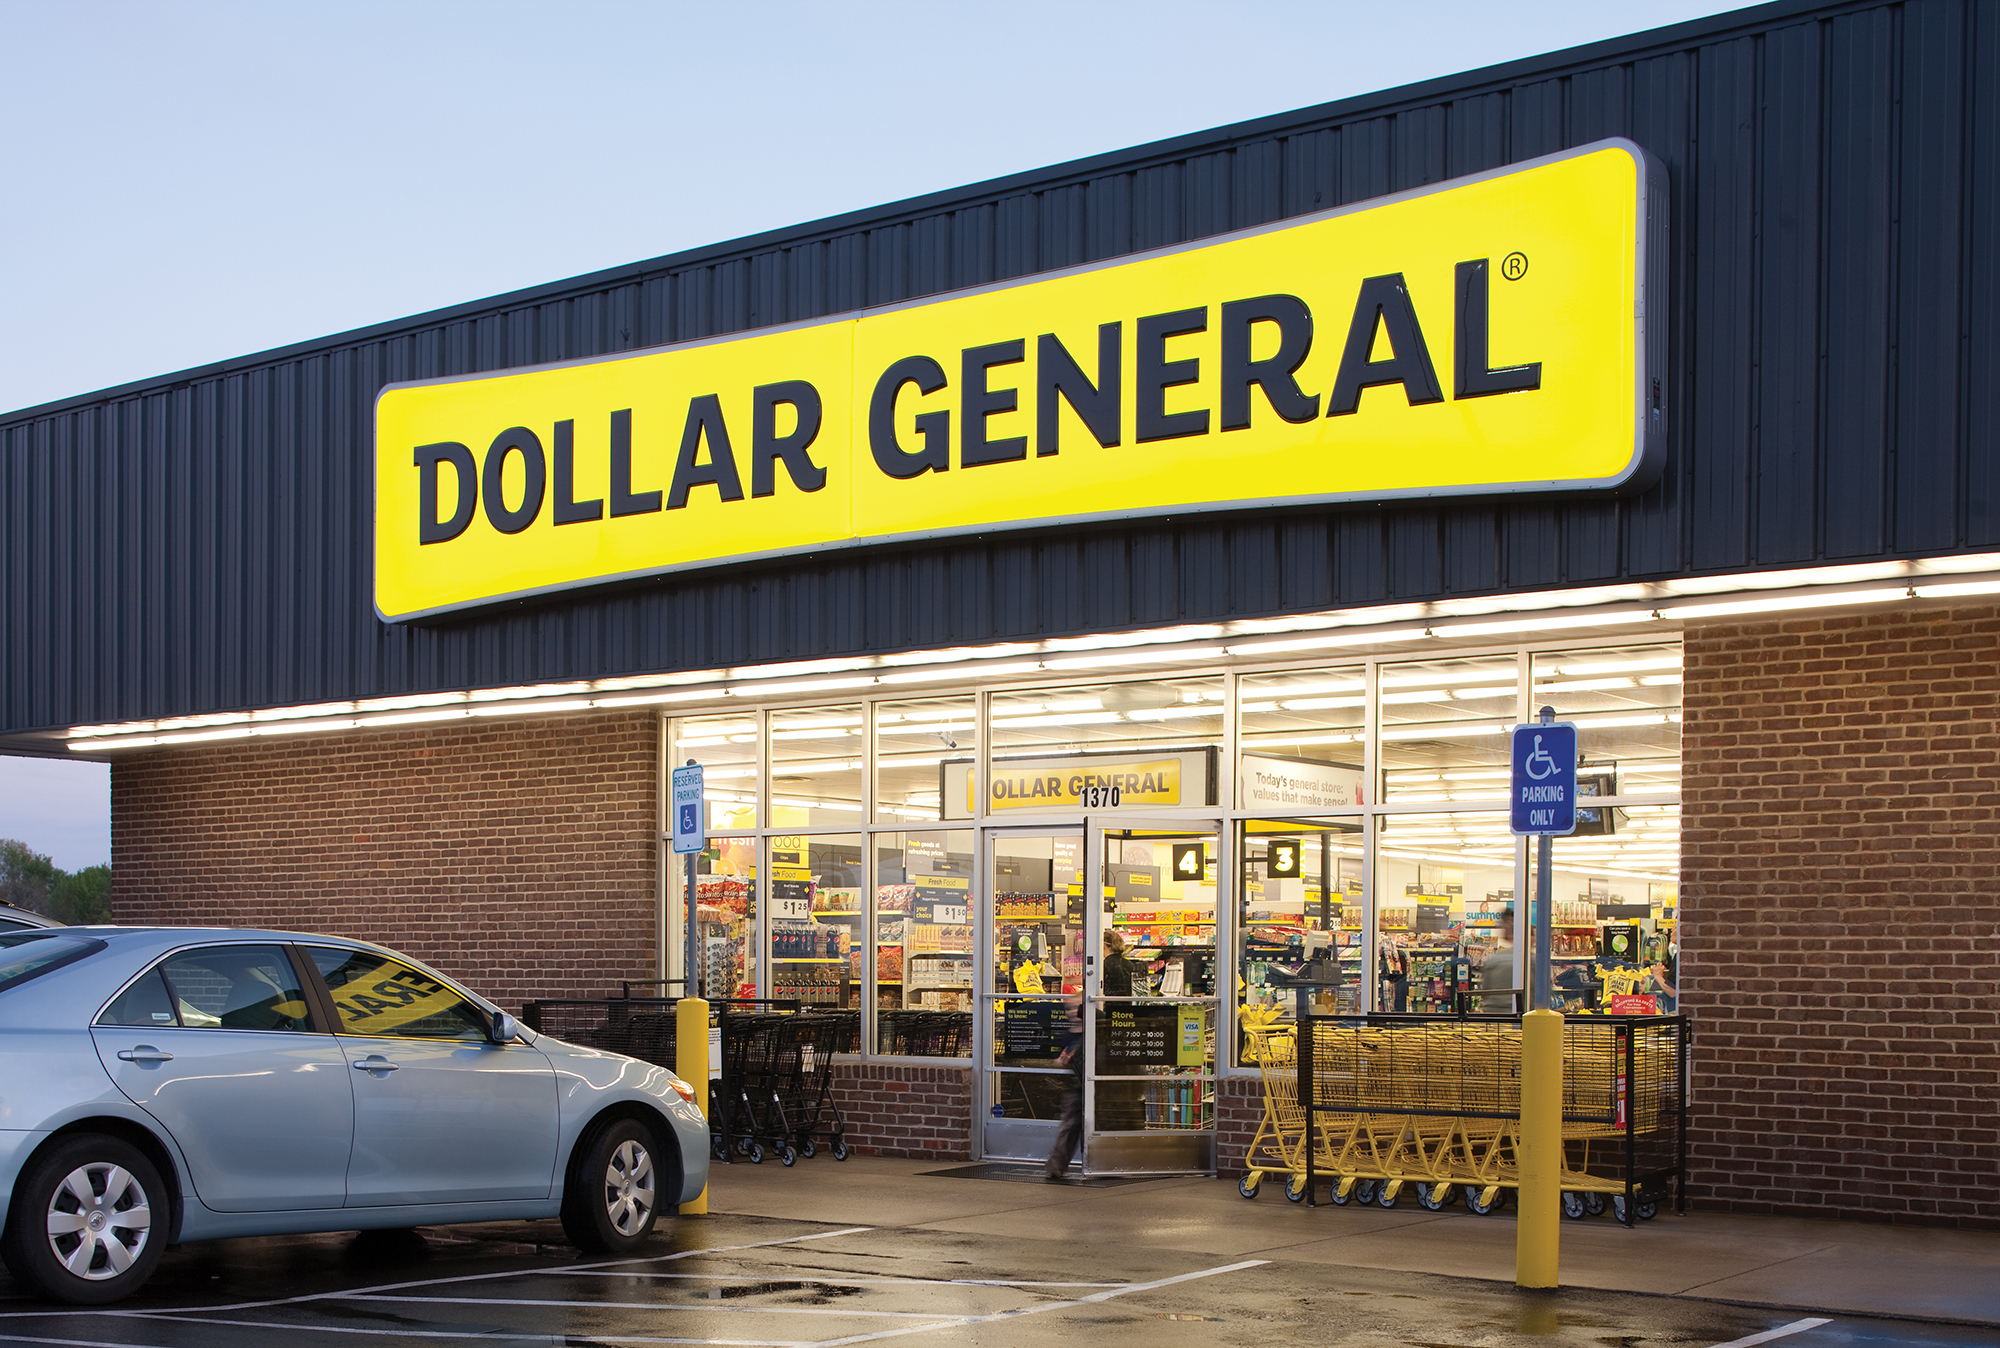 Statista.com, a market and consumer data site, says Dollar General has 992 stores in Florida and 1,017 in Georgia.